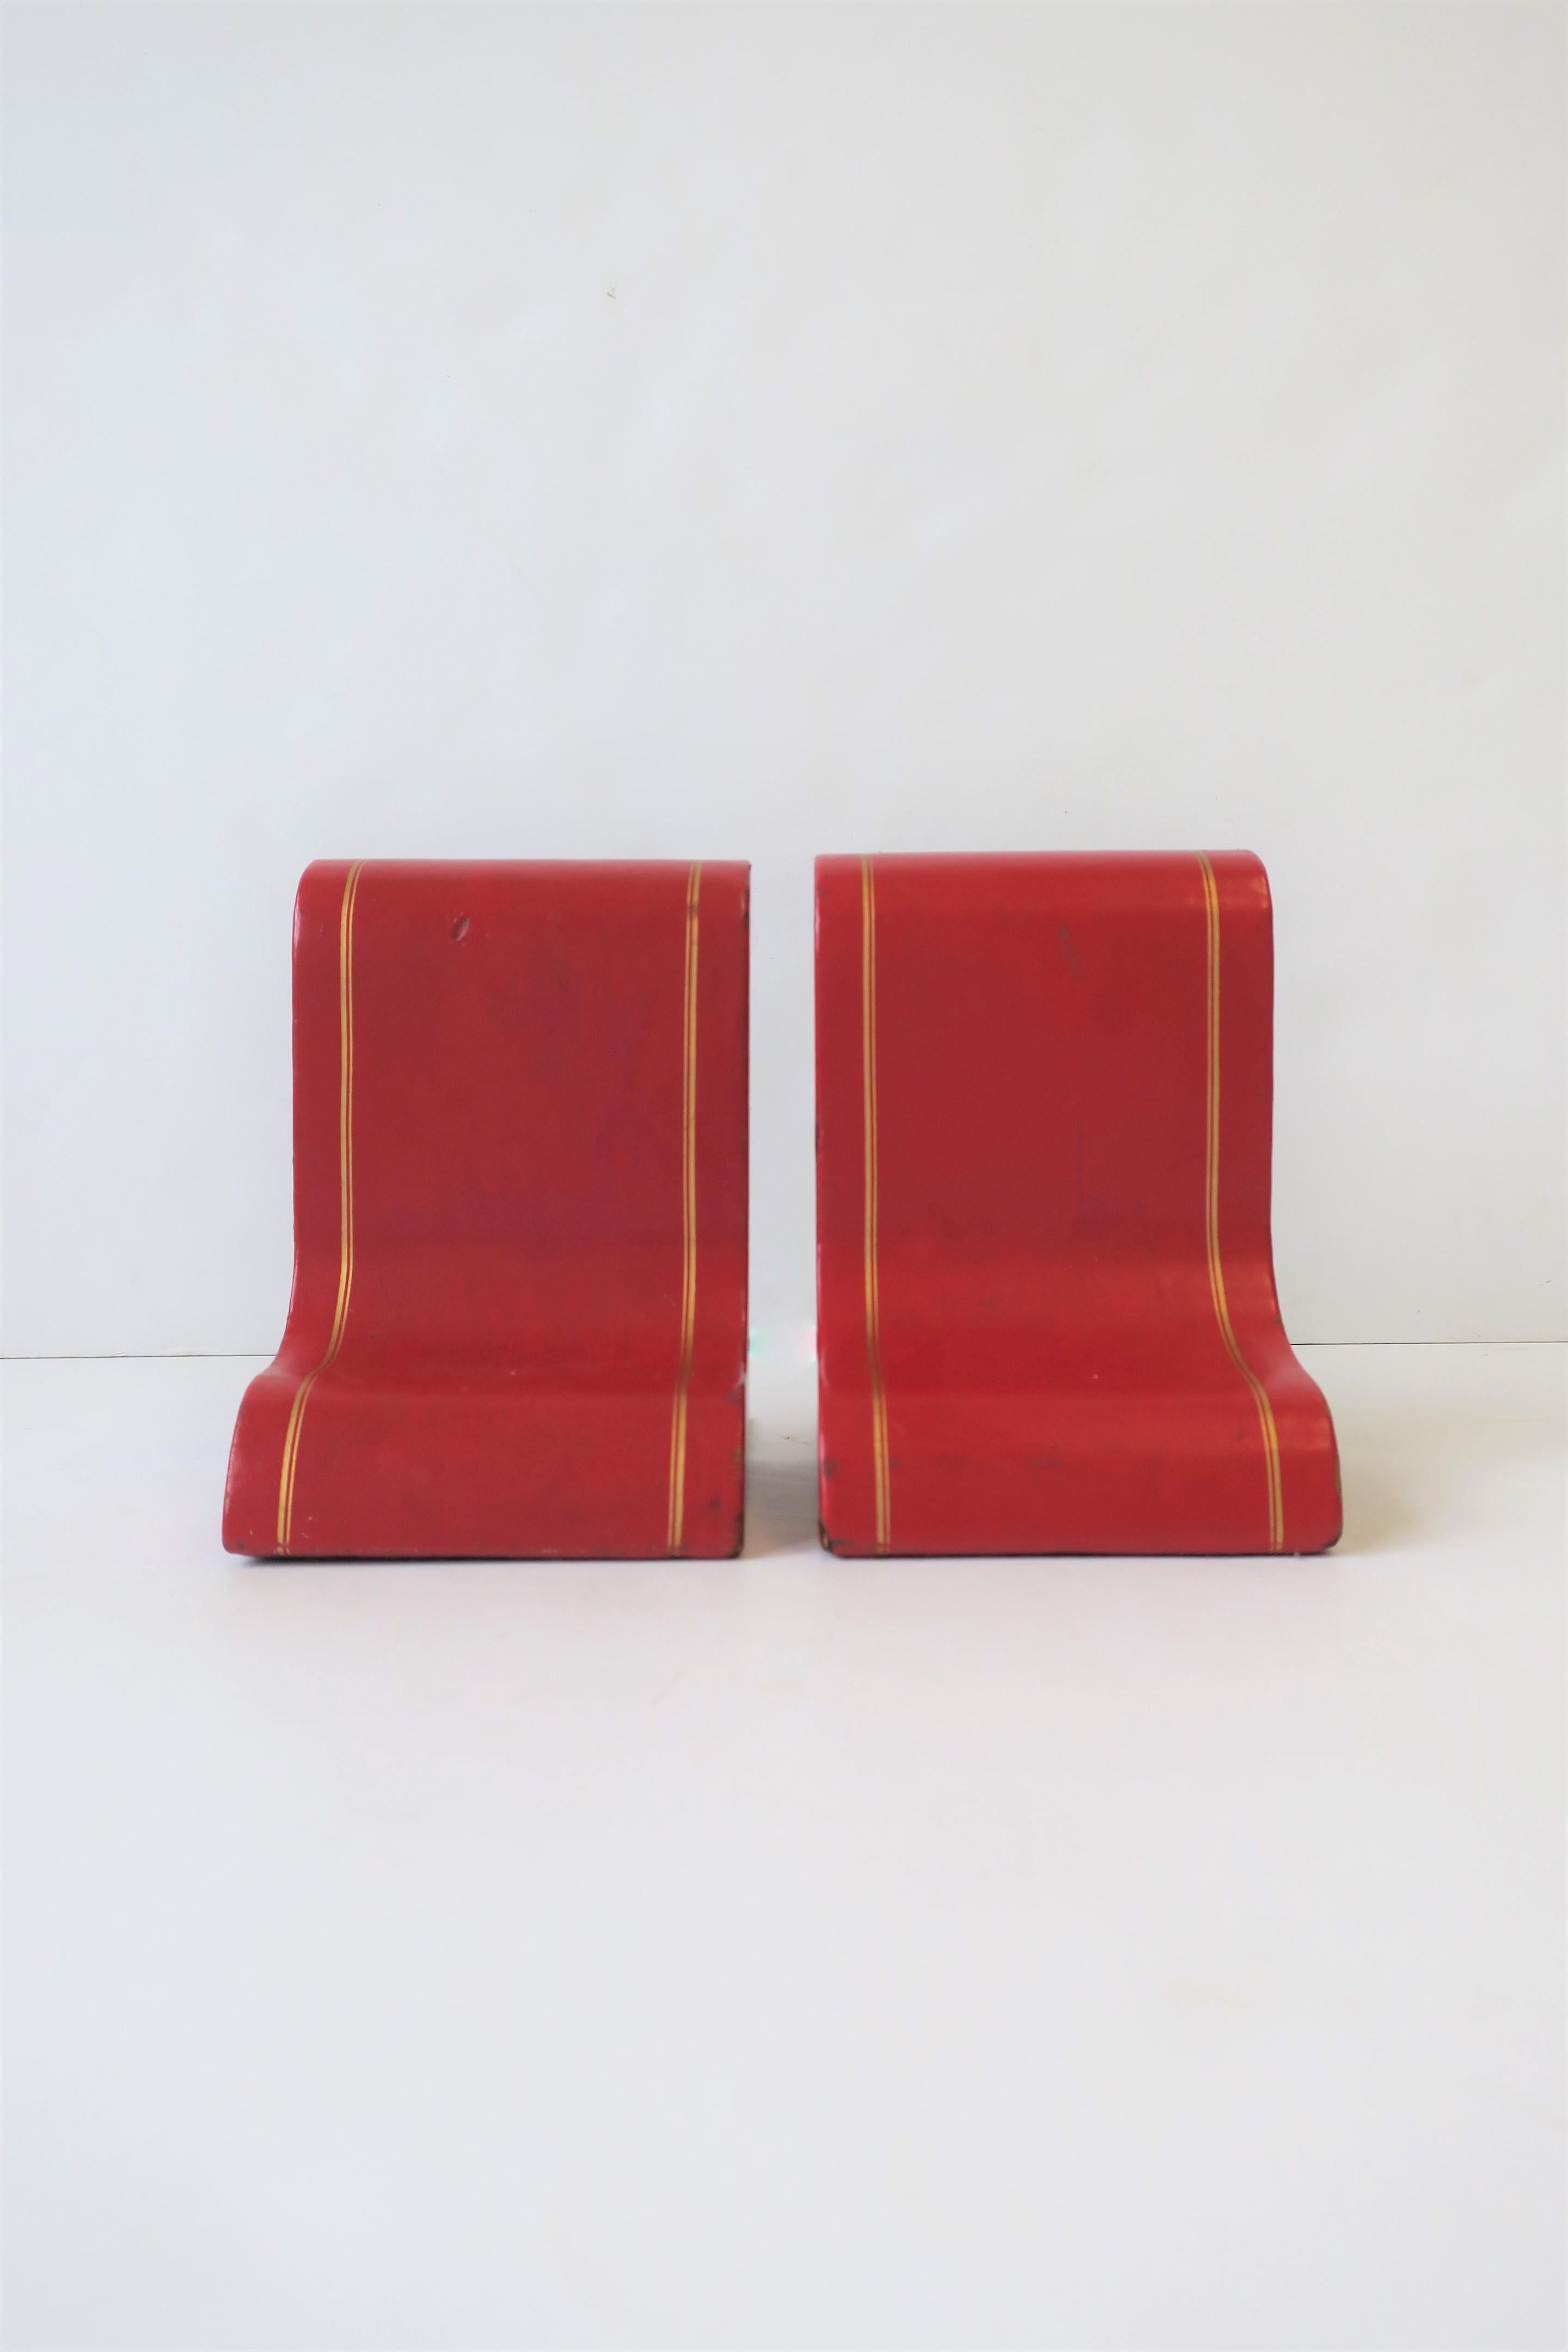 Italian Red Leather and Gold Bookends, Pair For Sale 4